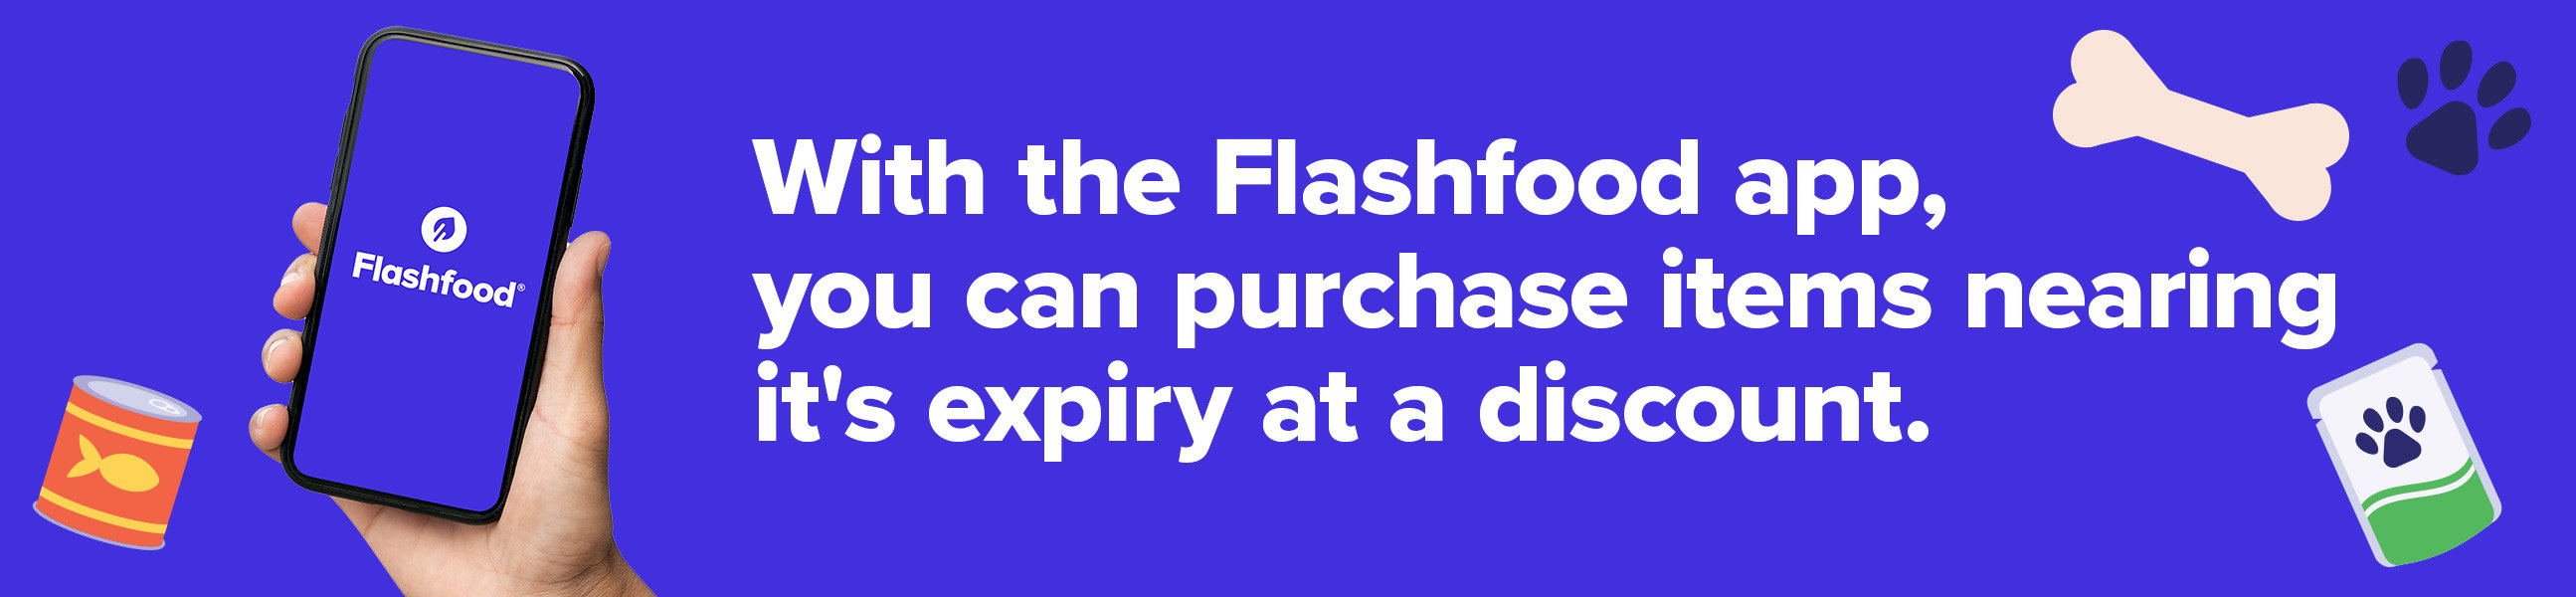 with the flashfood app, you can purchase items nearing it's expiry at a discount